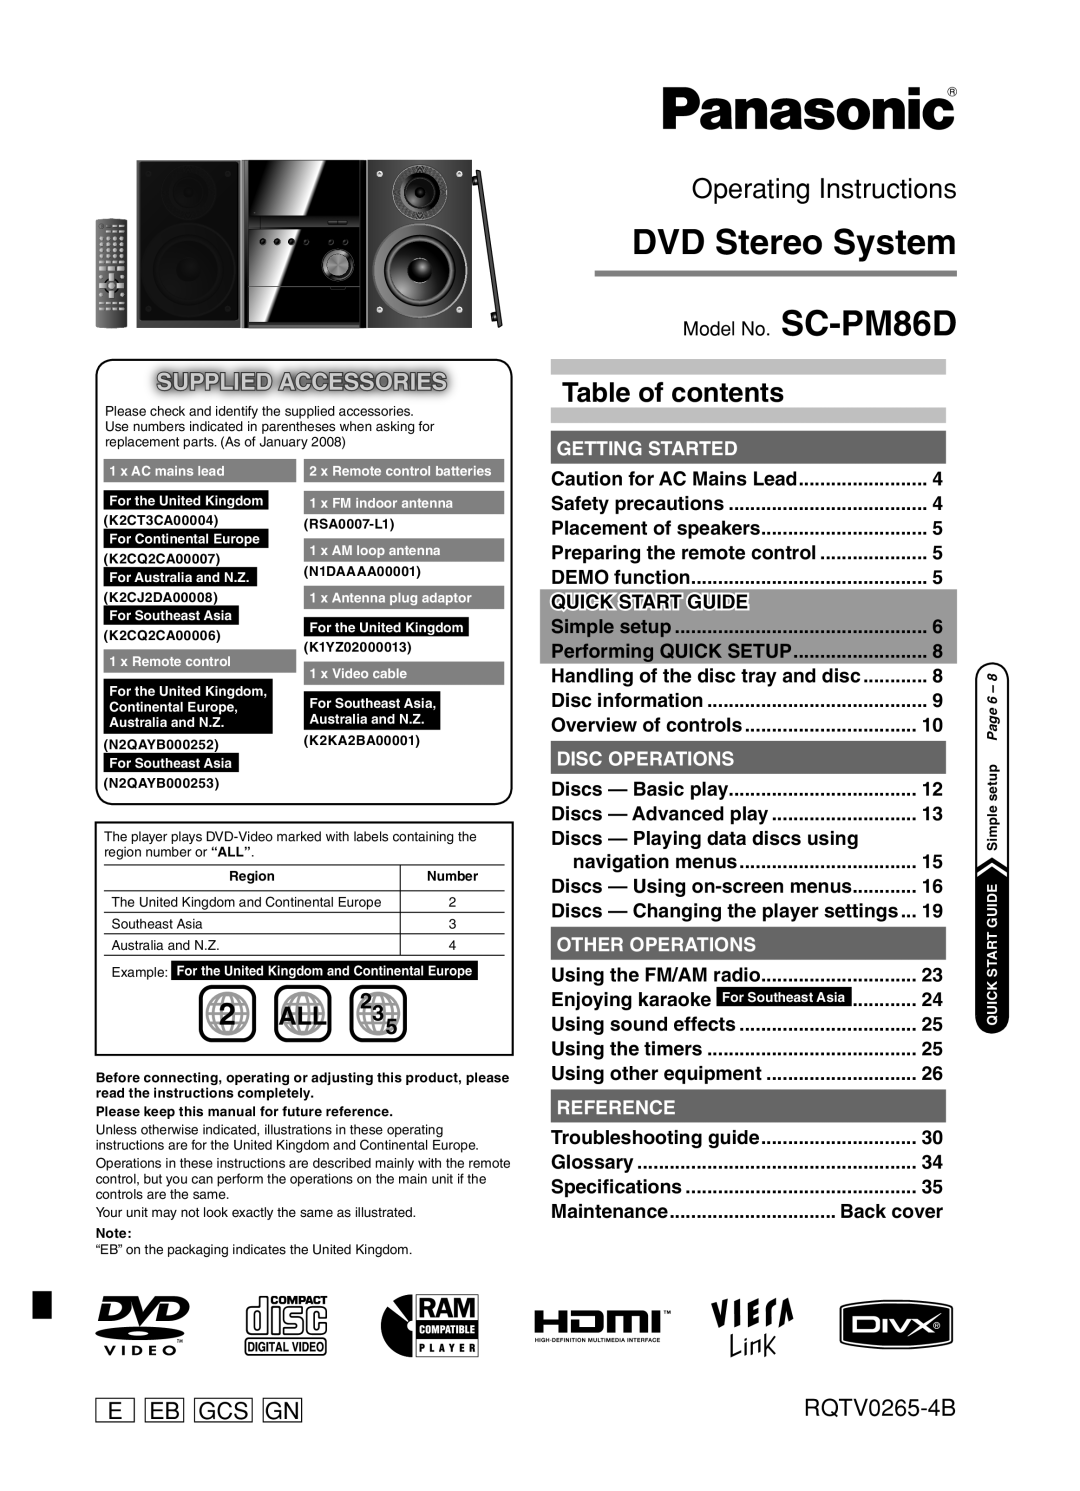 Panasonic SC-PM86D operating instructions Eb Gcs Gn, RQTV0265-4B, Getting Started, Disc Operations, Other Operations, 2ALL 